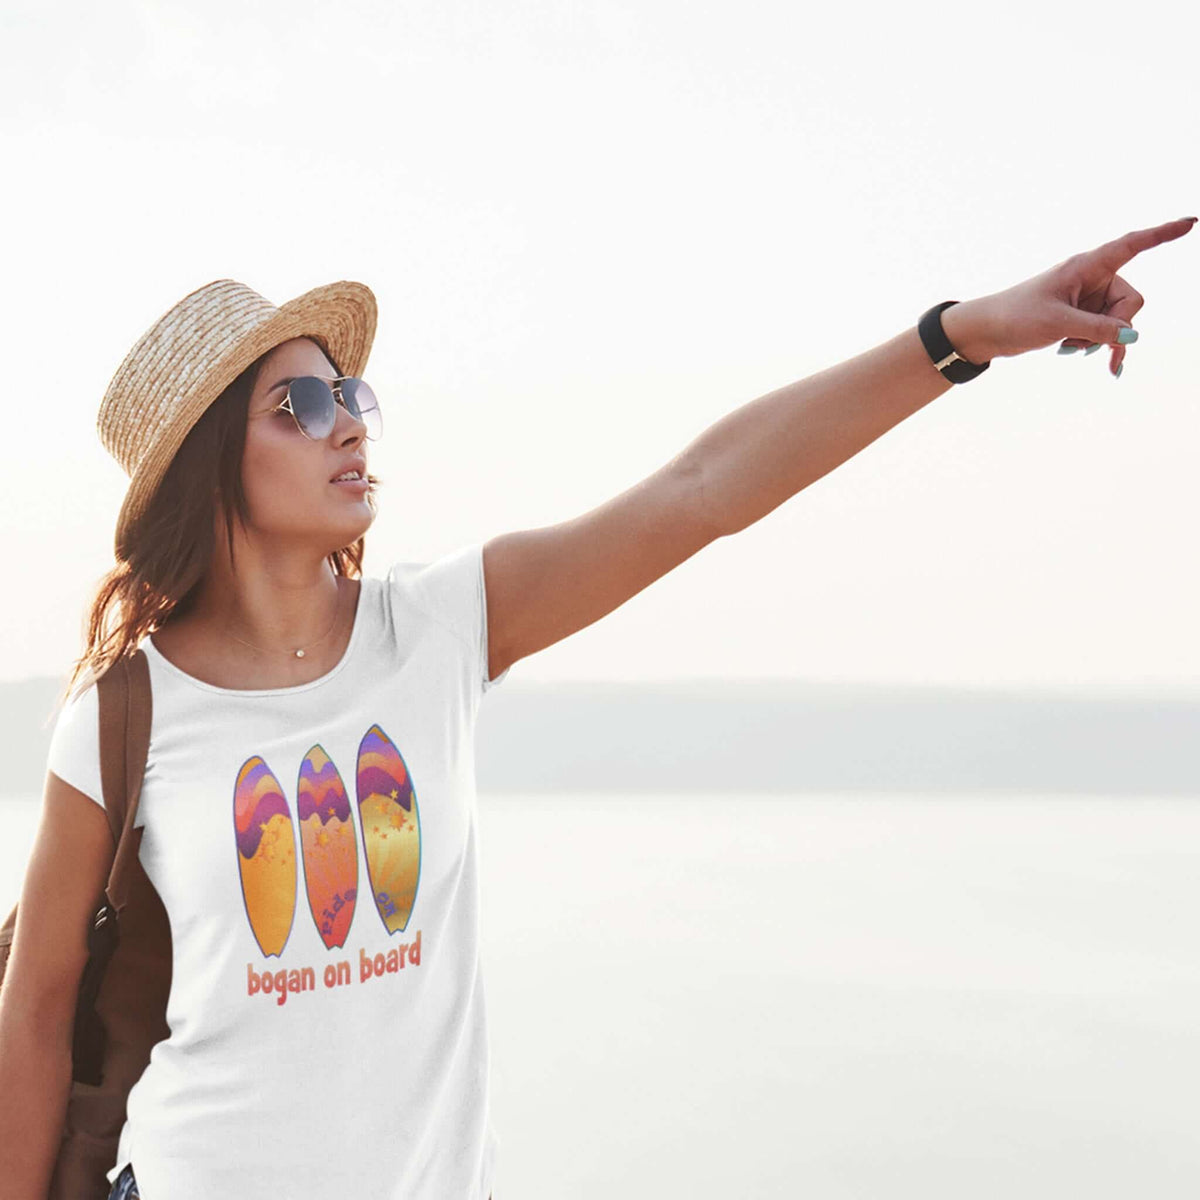 Woman wears white tee with graphic surf design.